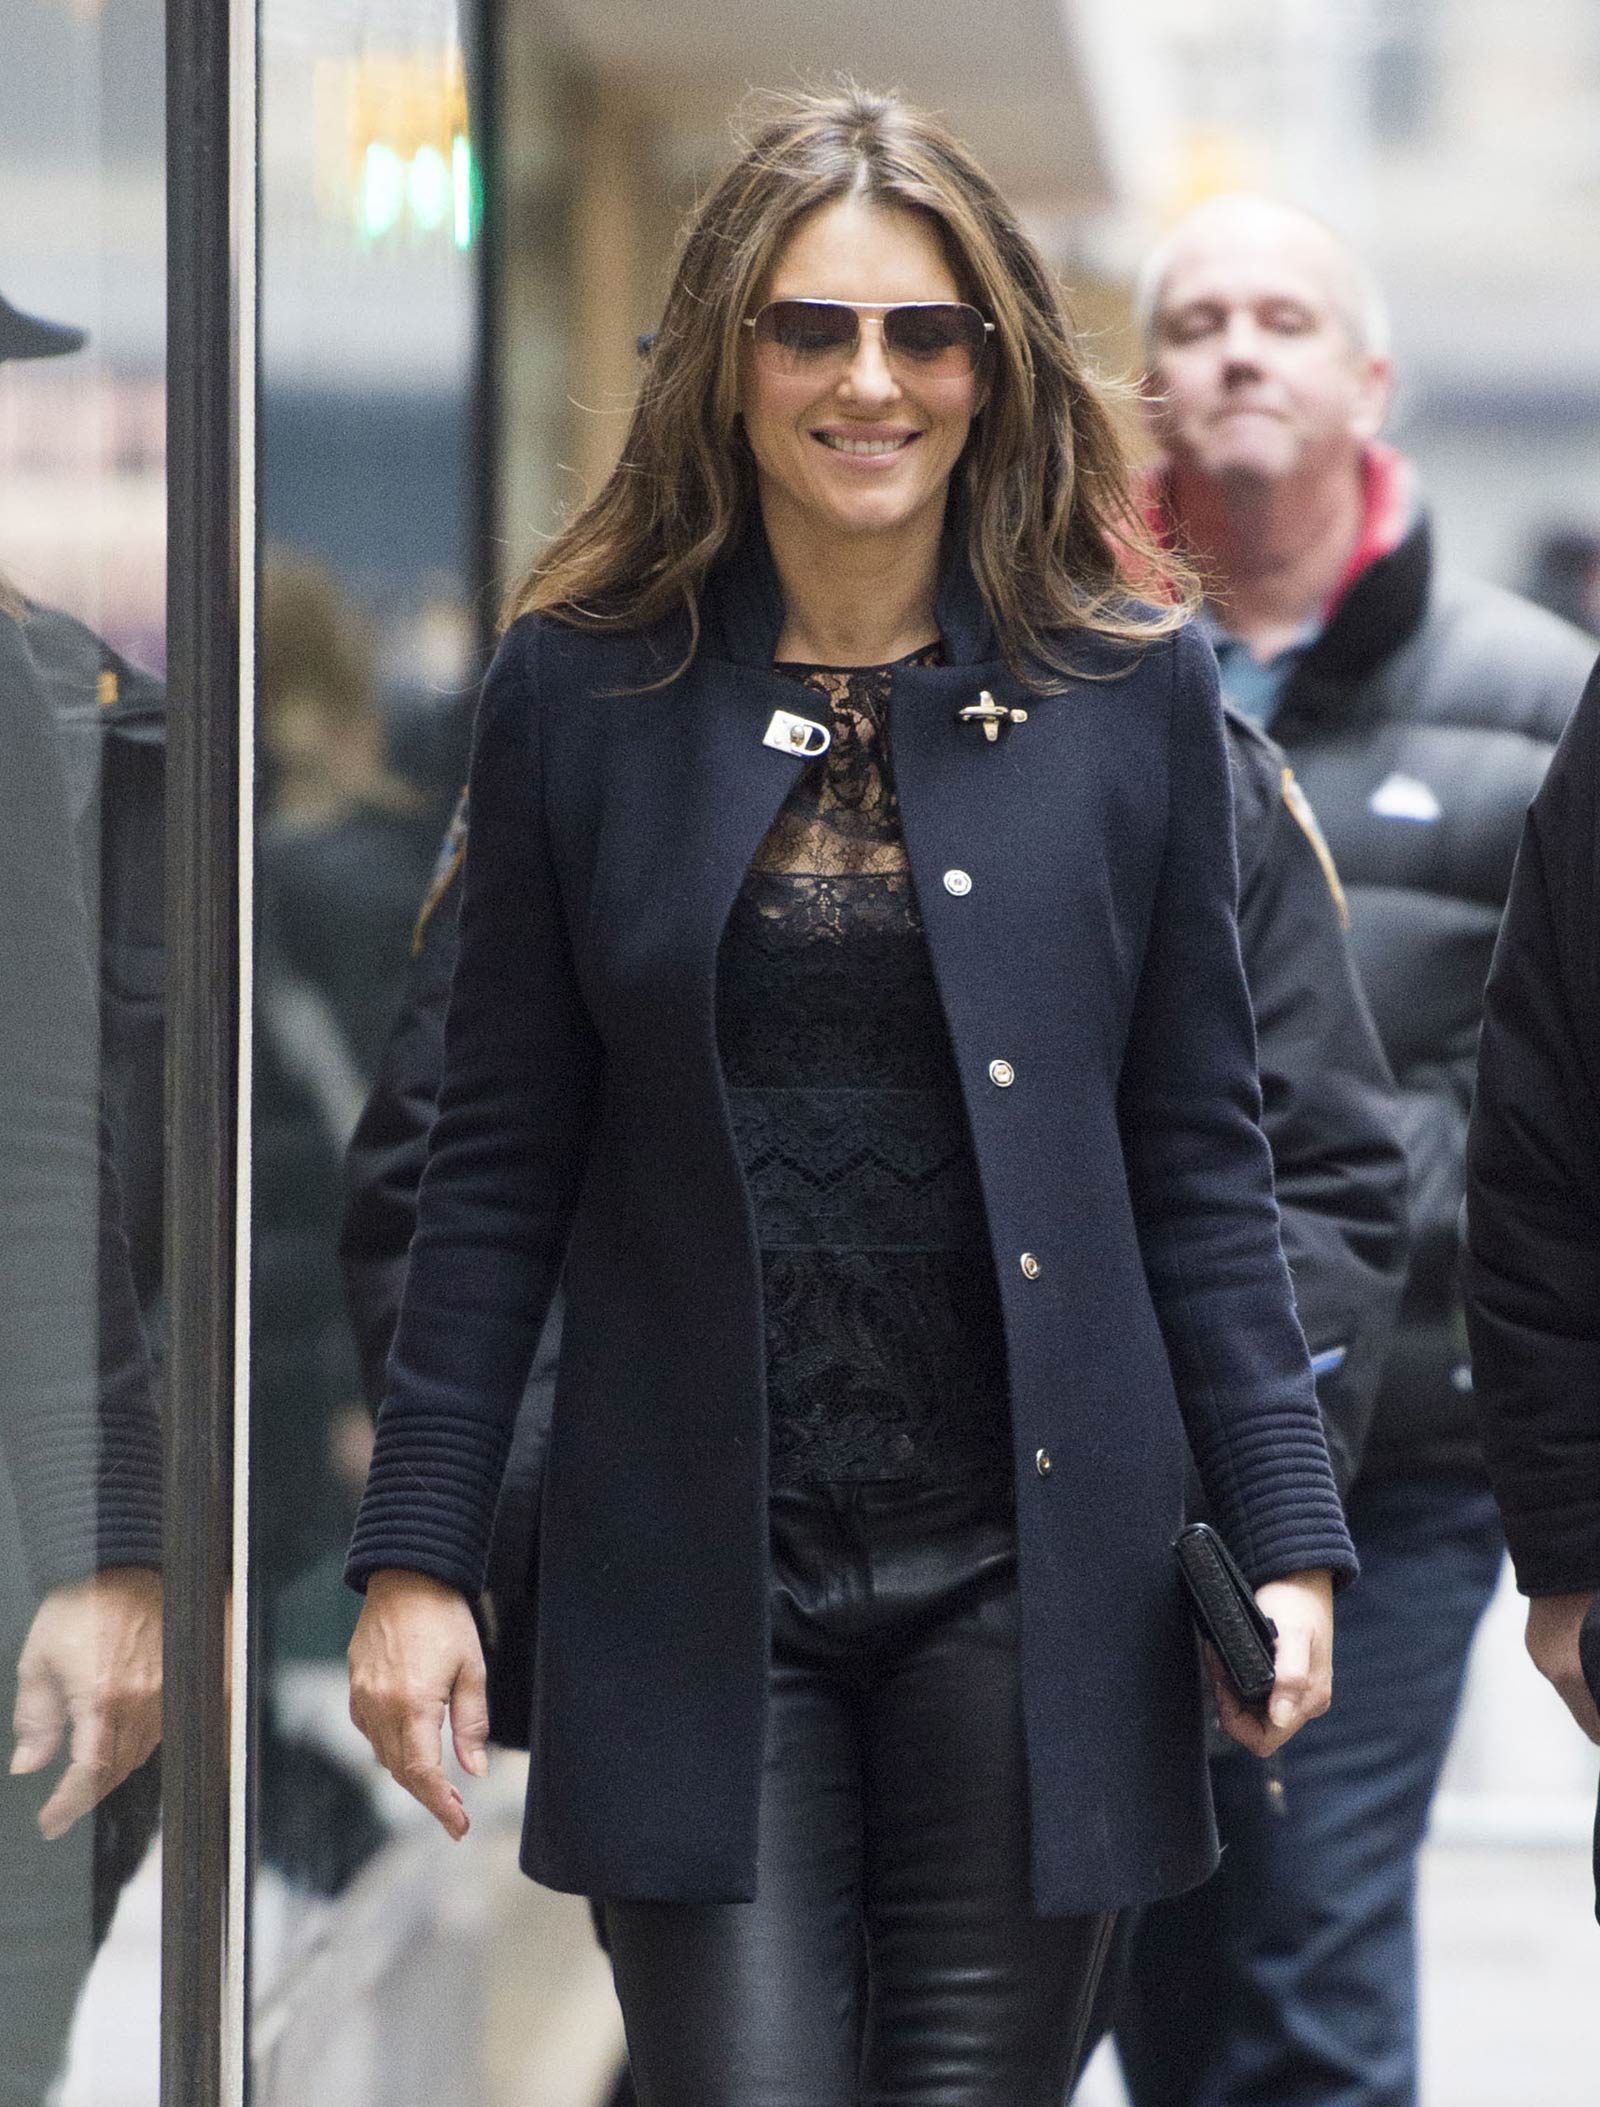 Liz Hurley out and about in NYC